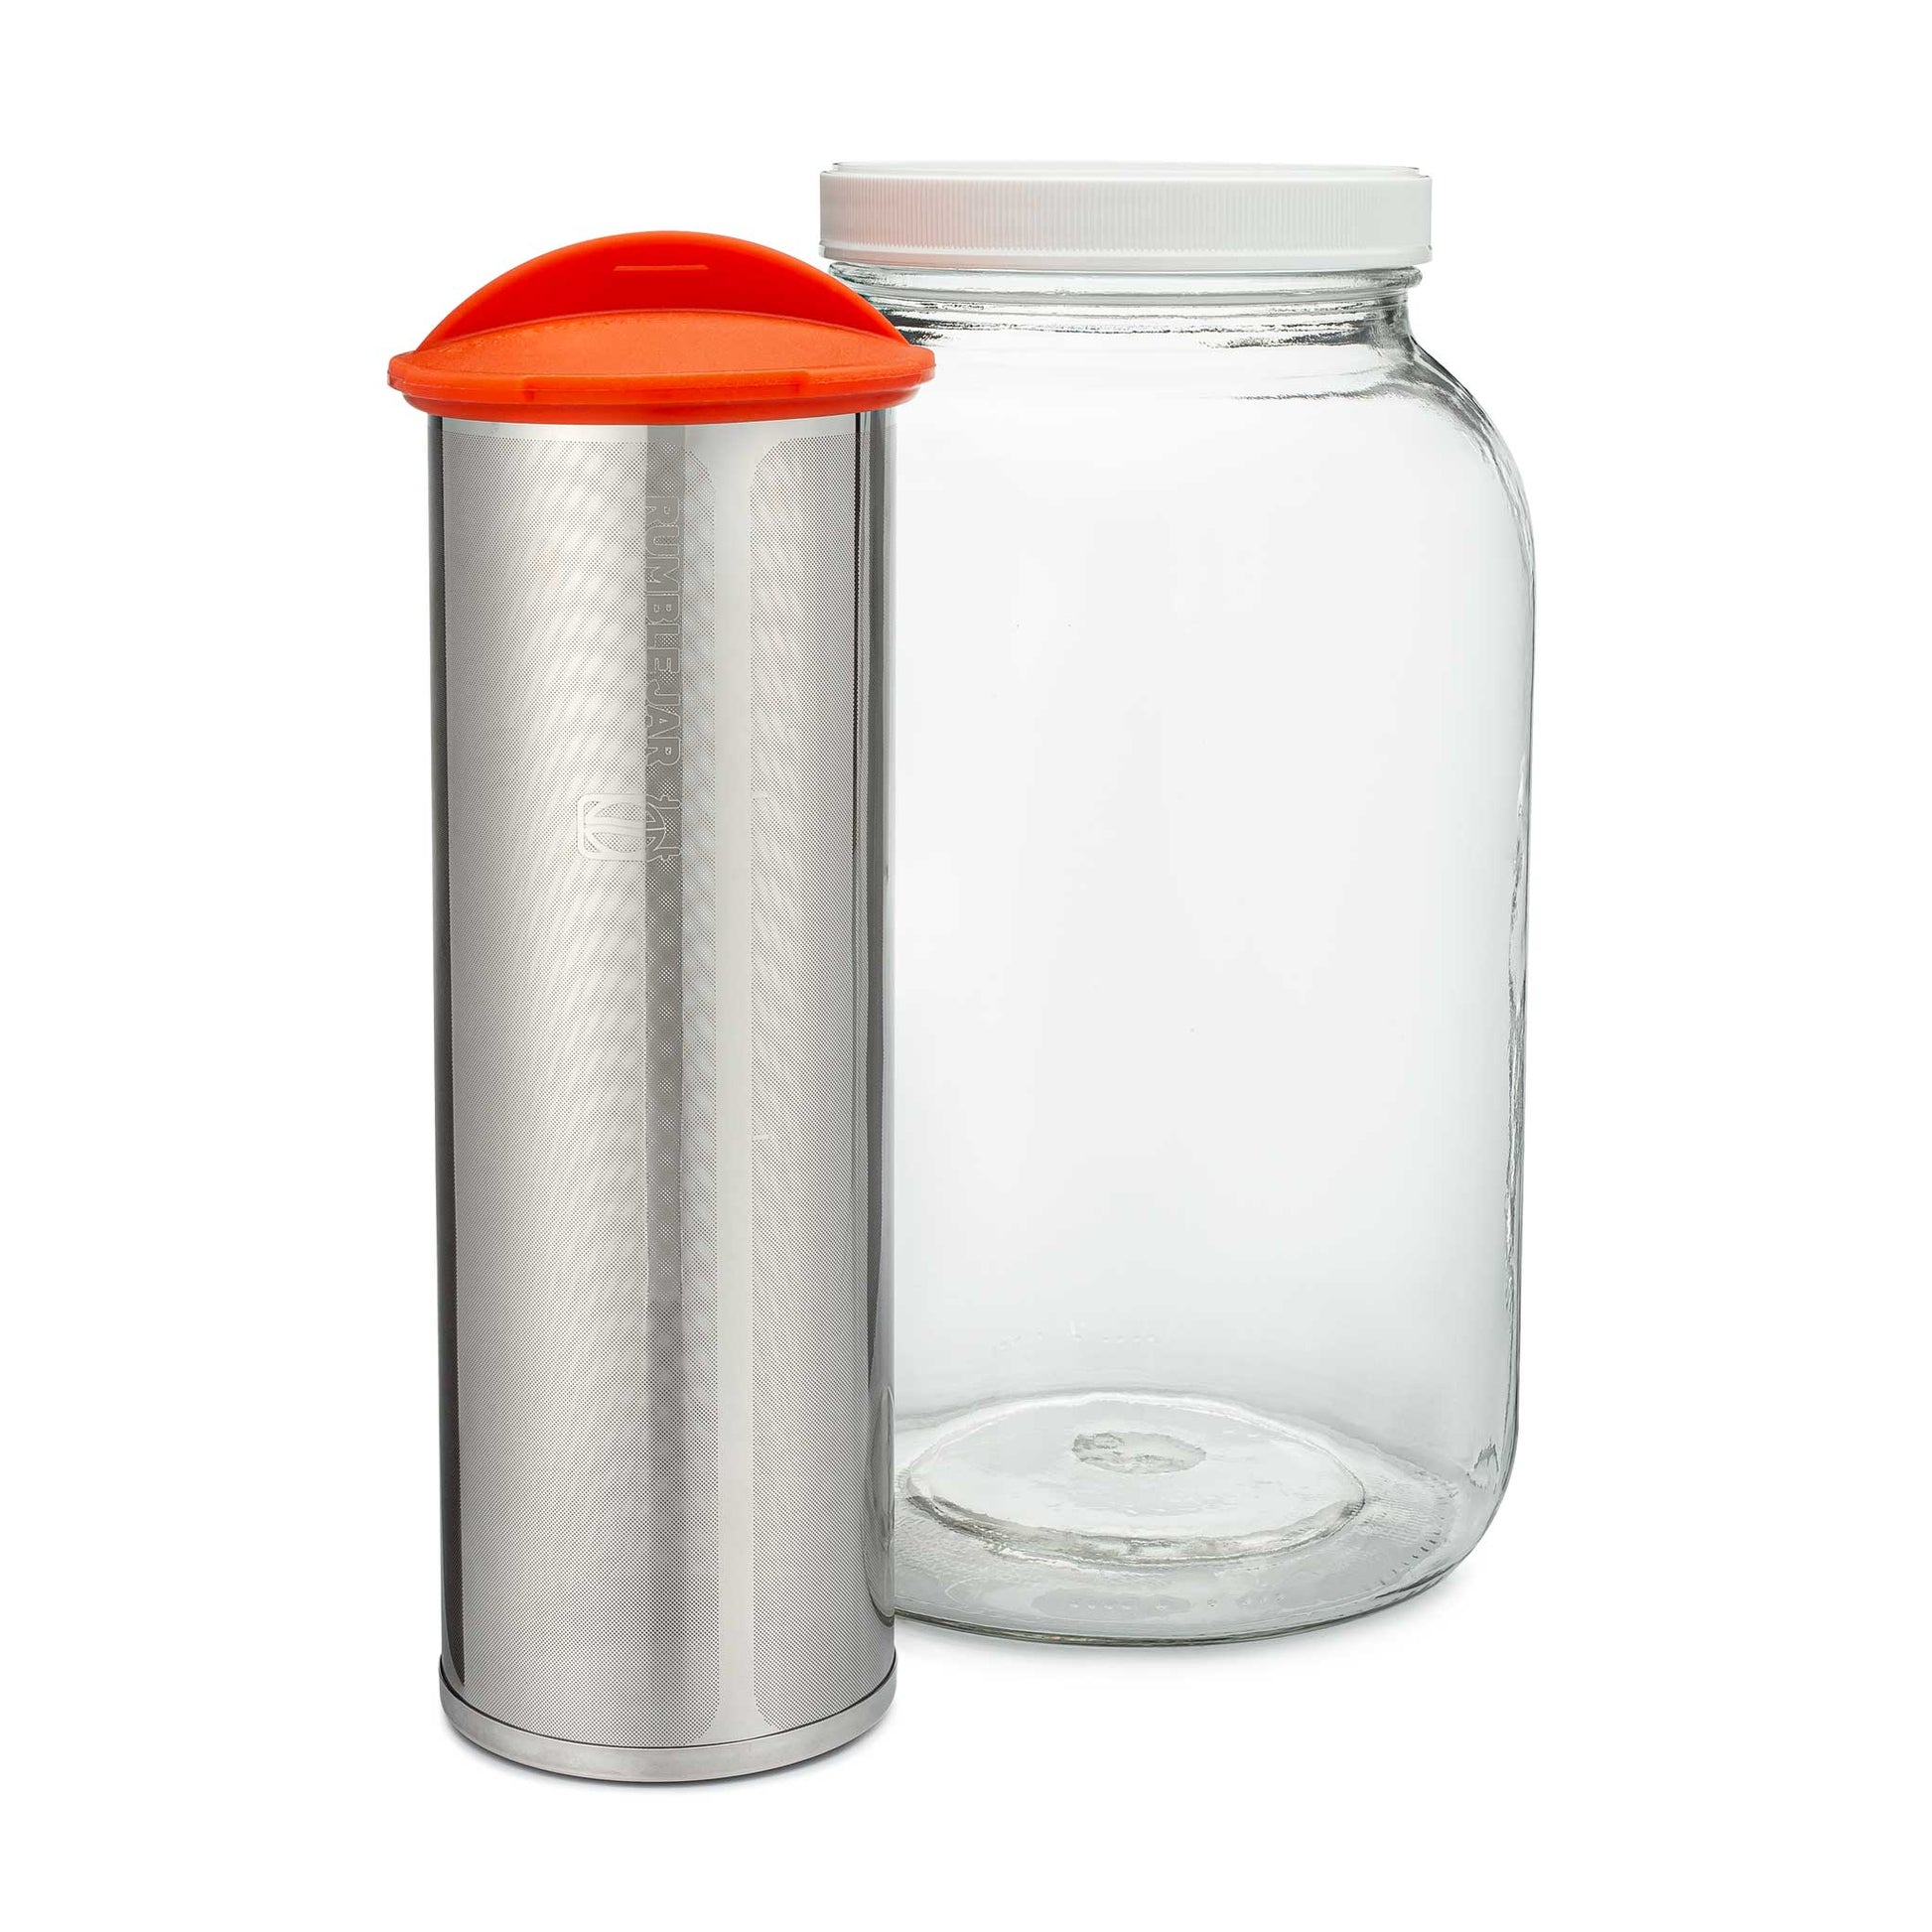 Rumble Jar: One Gallon size (128oz), filter-only (no jar included)